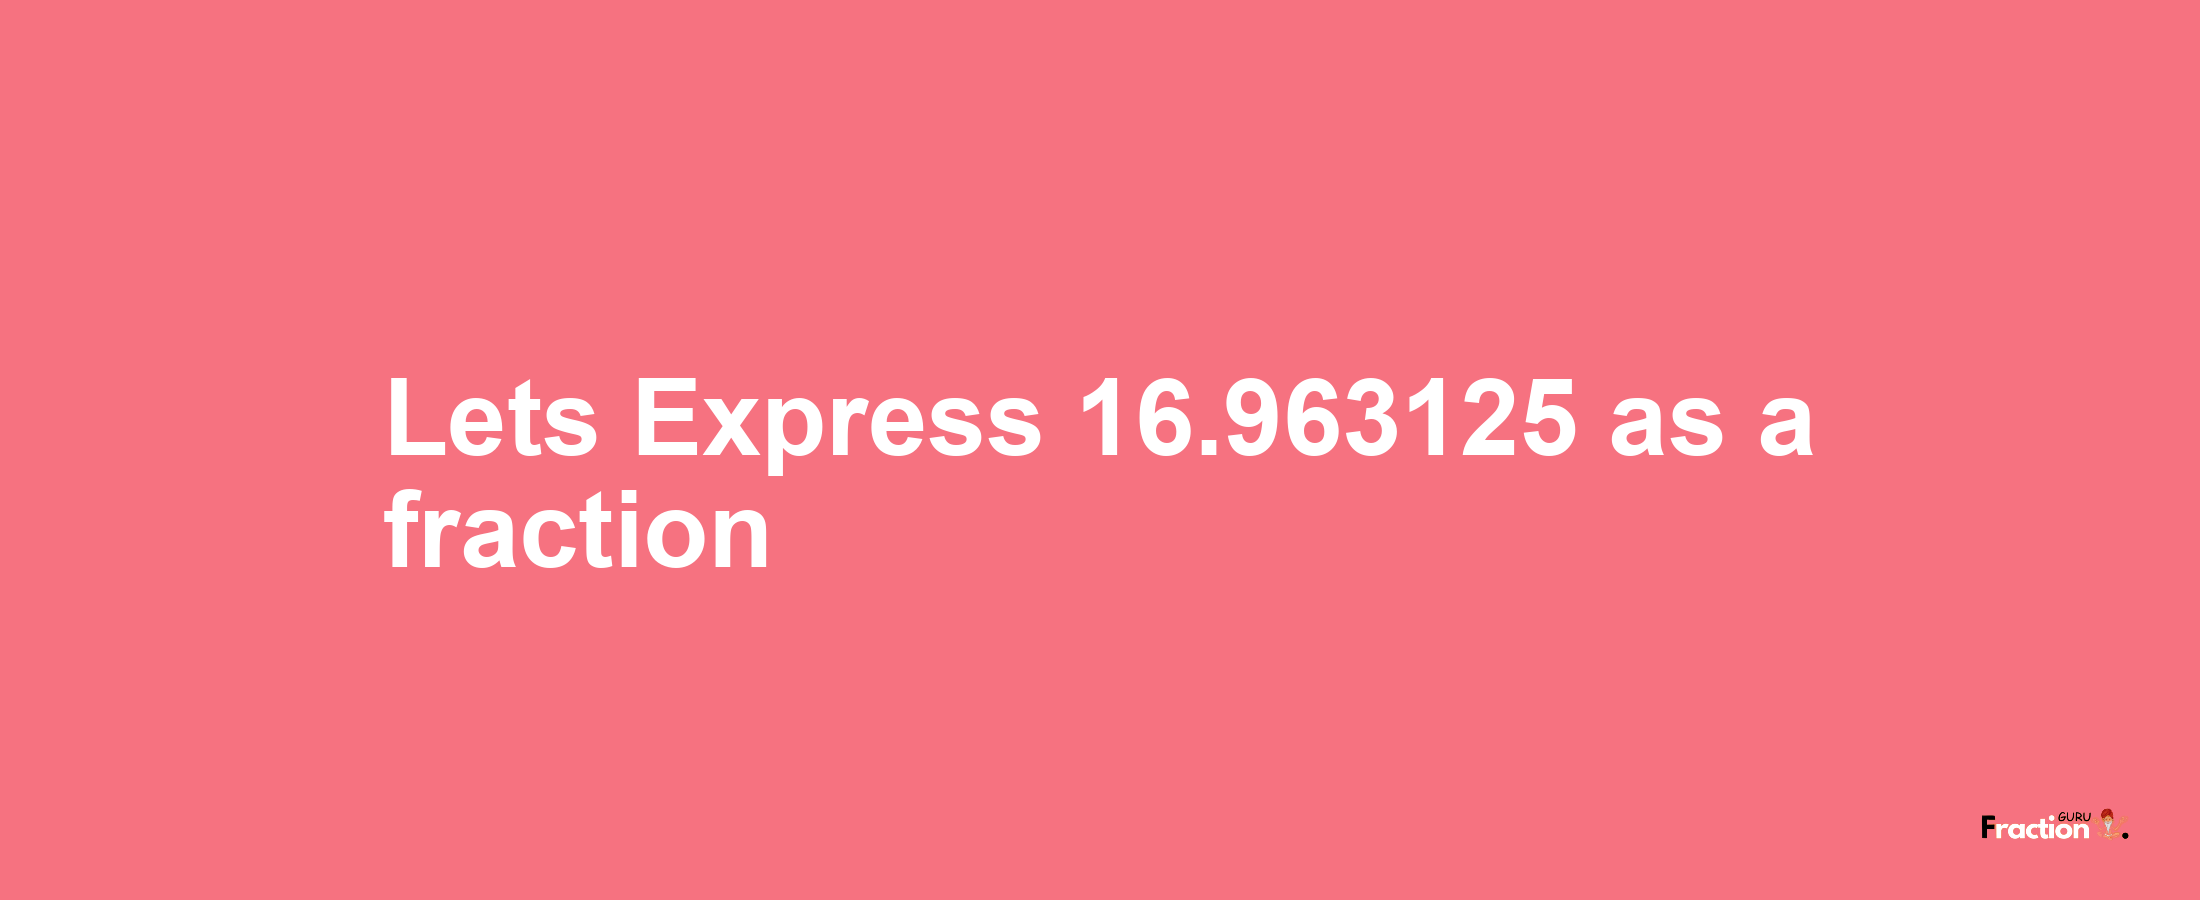 Lets Express 16.963125 as afraction